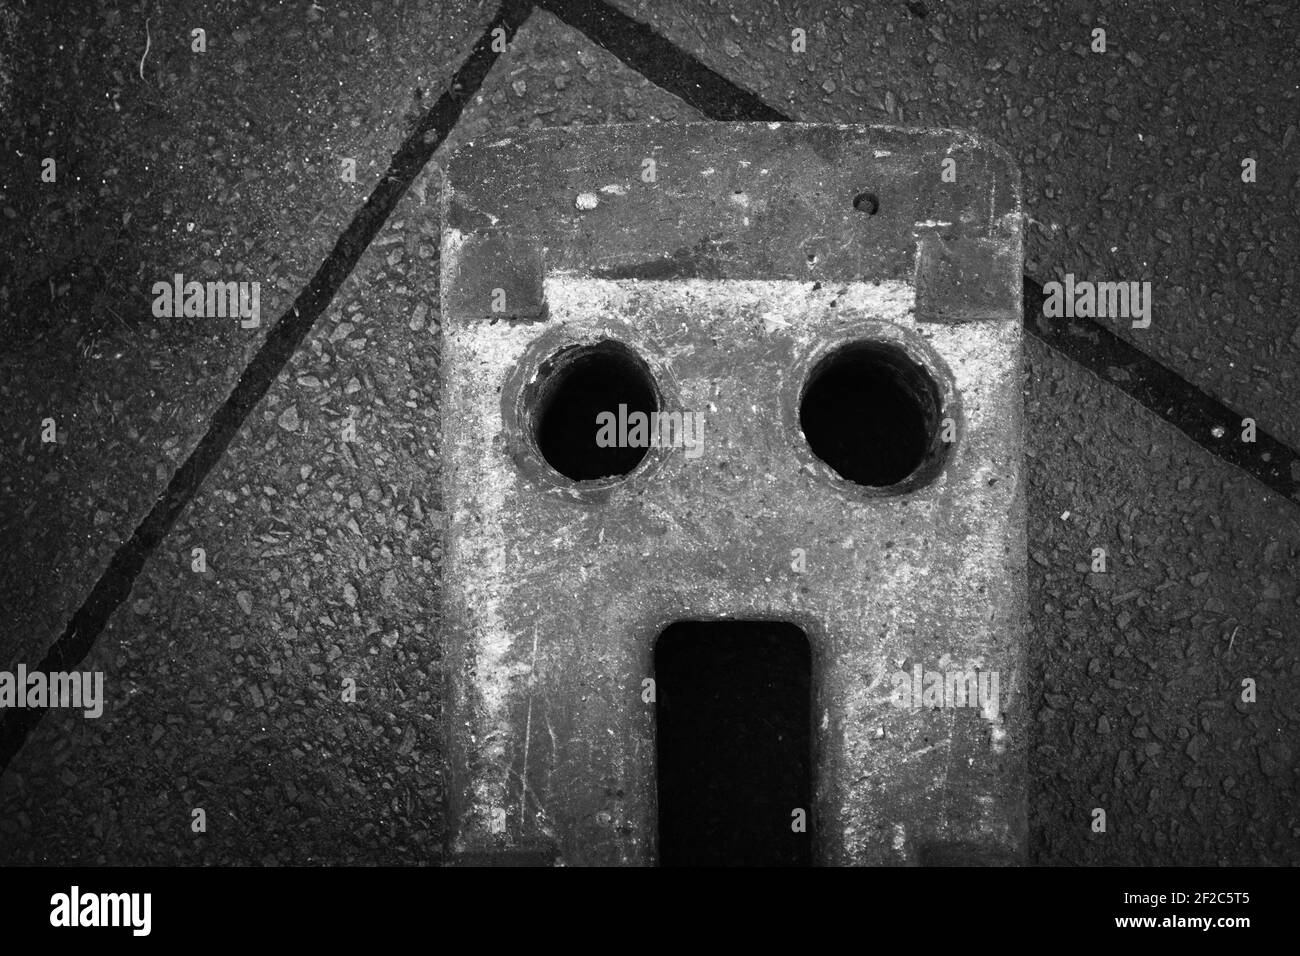 Concrete block looking like scared, surprised face Stock Photo